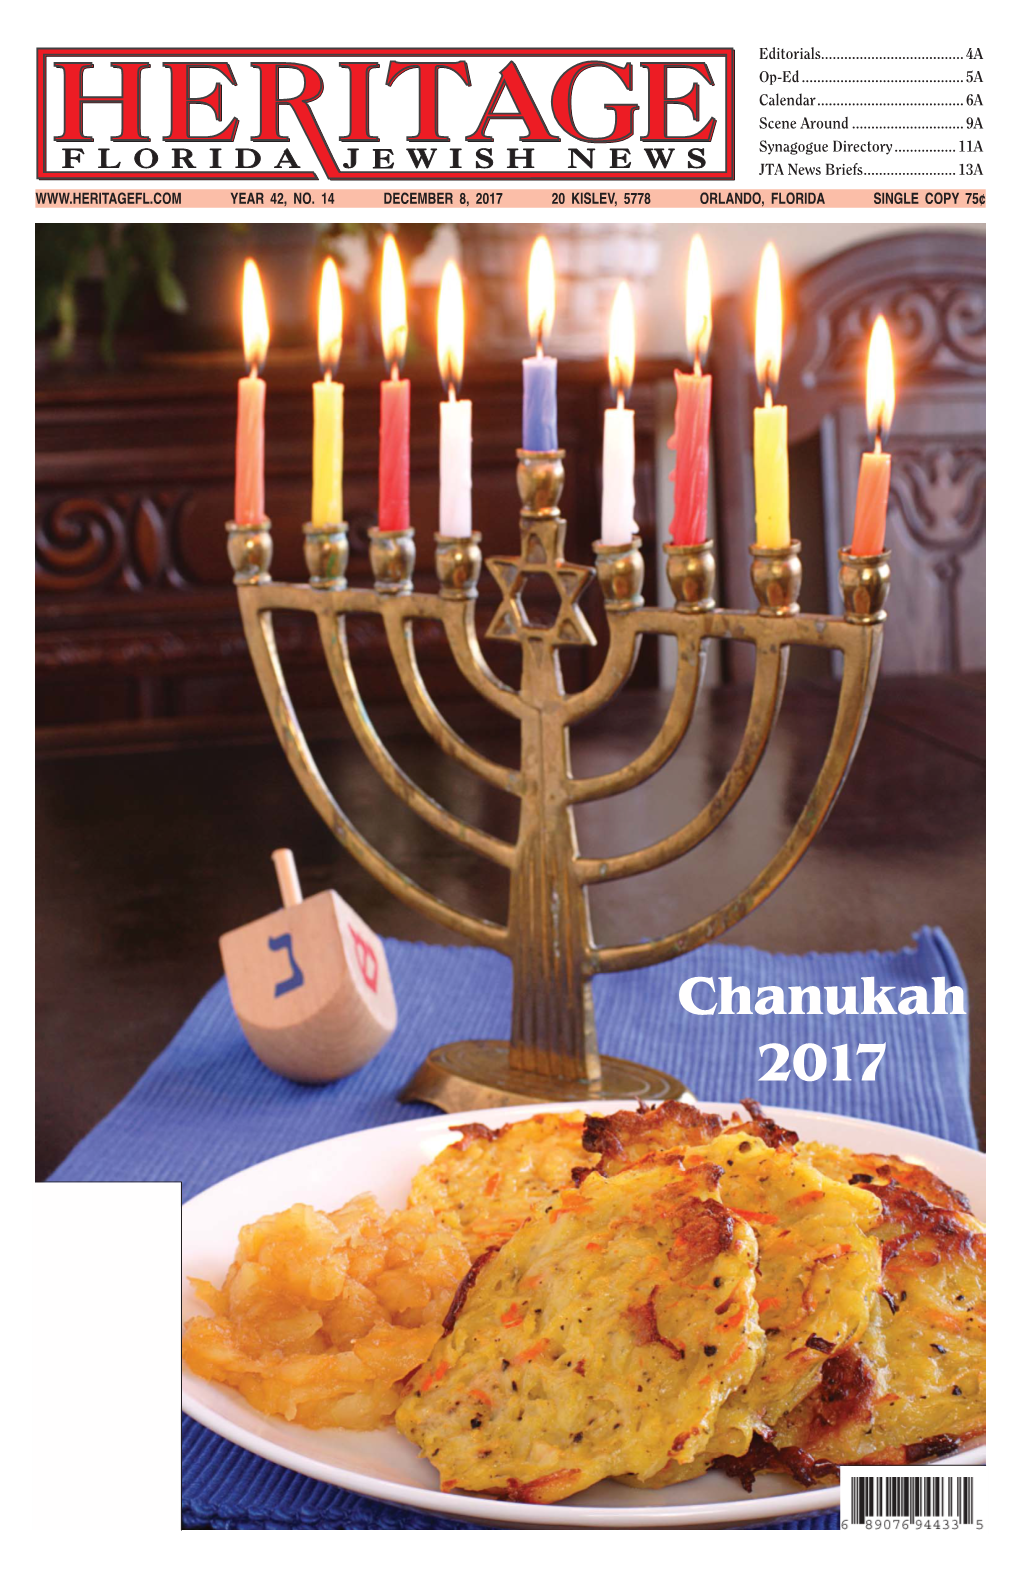 Chanukah 2017 PAGE 2A HERITAGE FLORIDA JEWISH NEWS, DECEMBER 8, 2017 Jewish Academy Honors the Steinberg Family and Dr